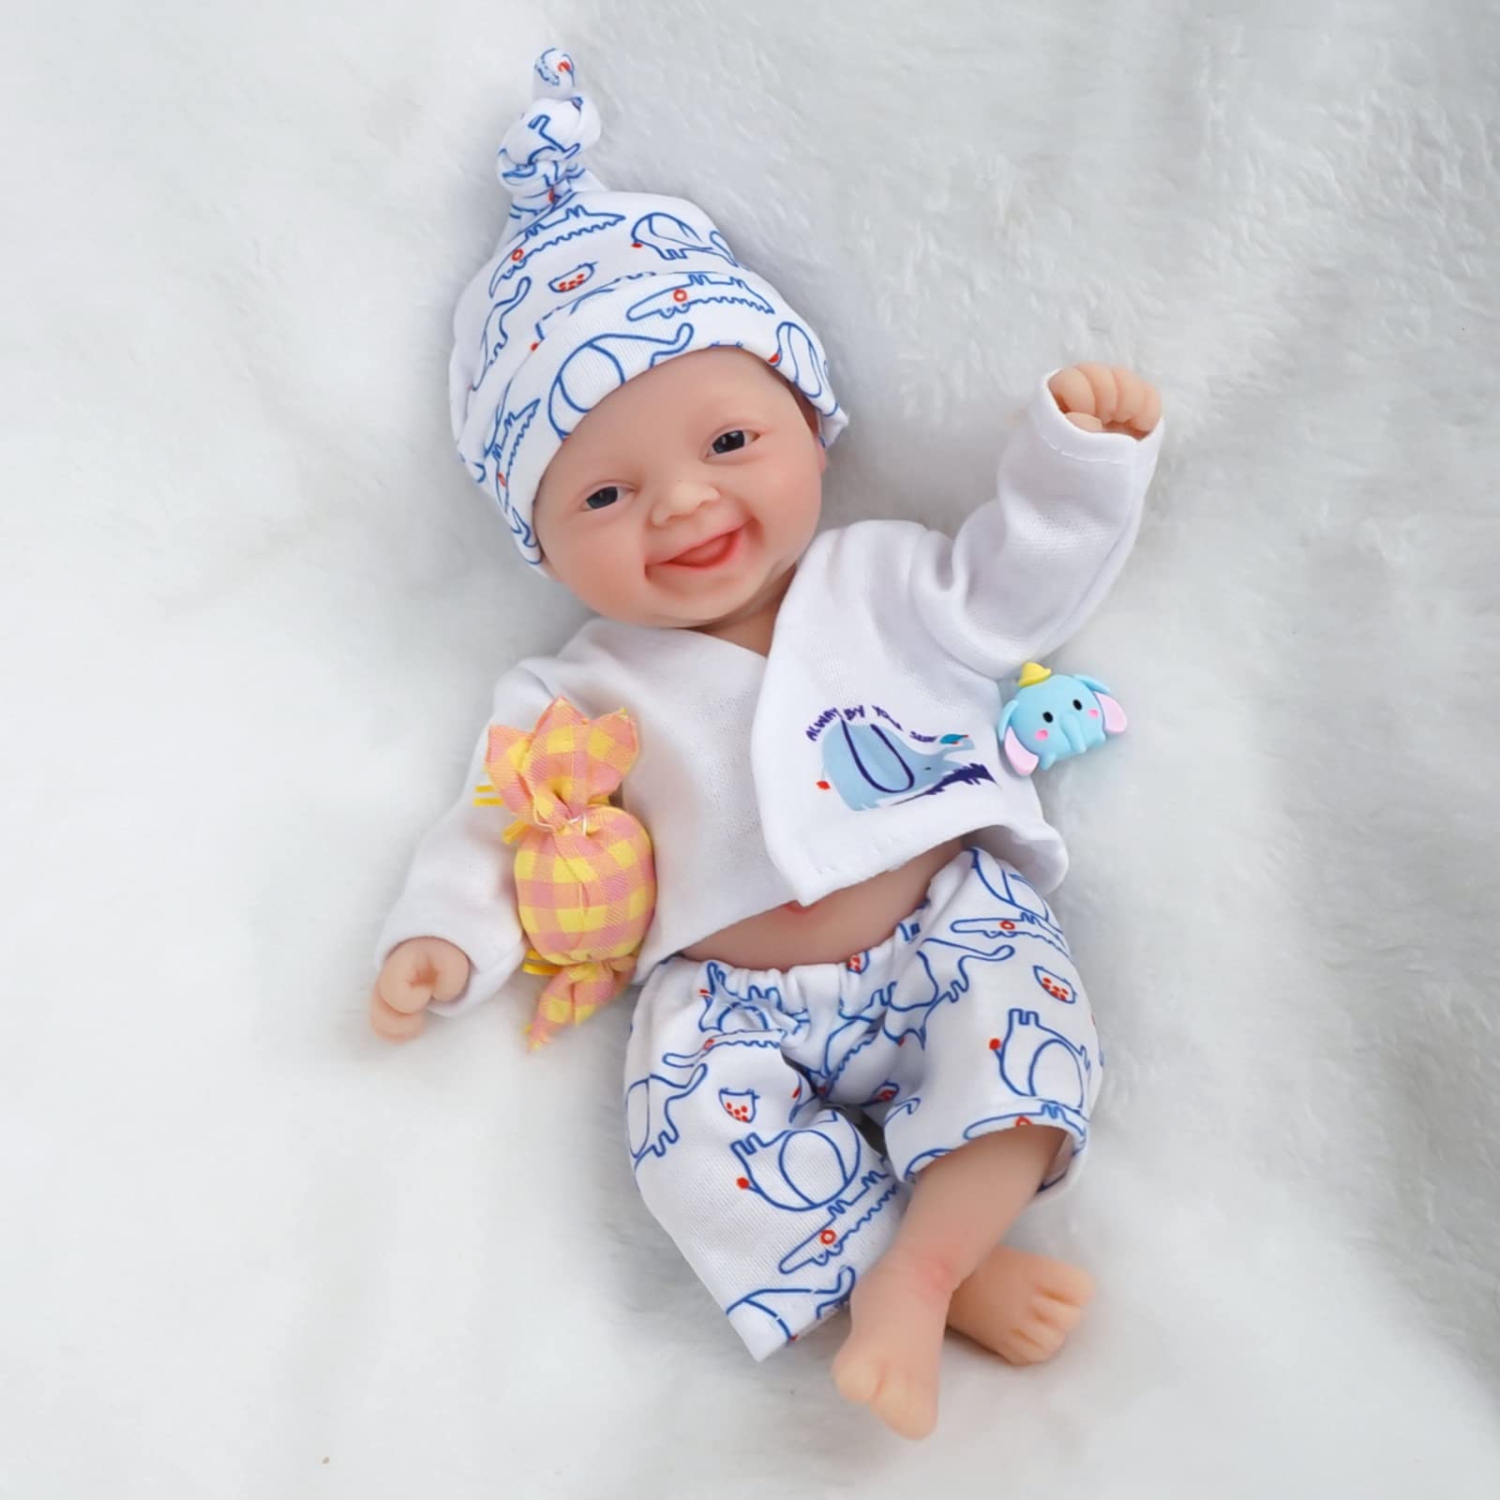 7" Reborn Silicone Baby Boy Doll with Full Body Realism, Handmade with Feeding & Bathing Accessories for Adult Stress Relief.